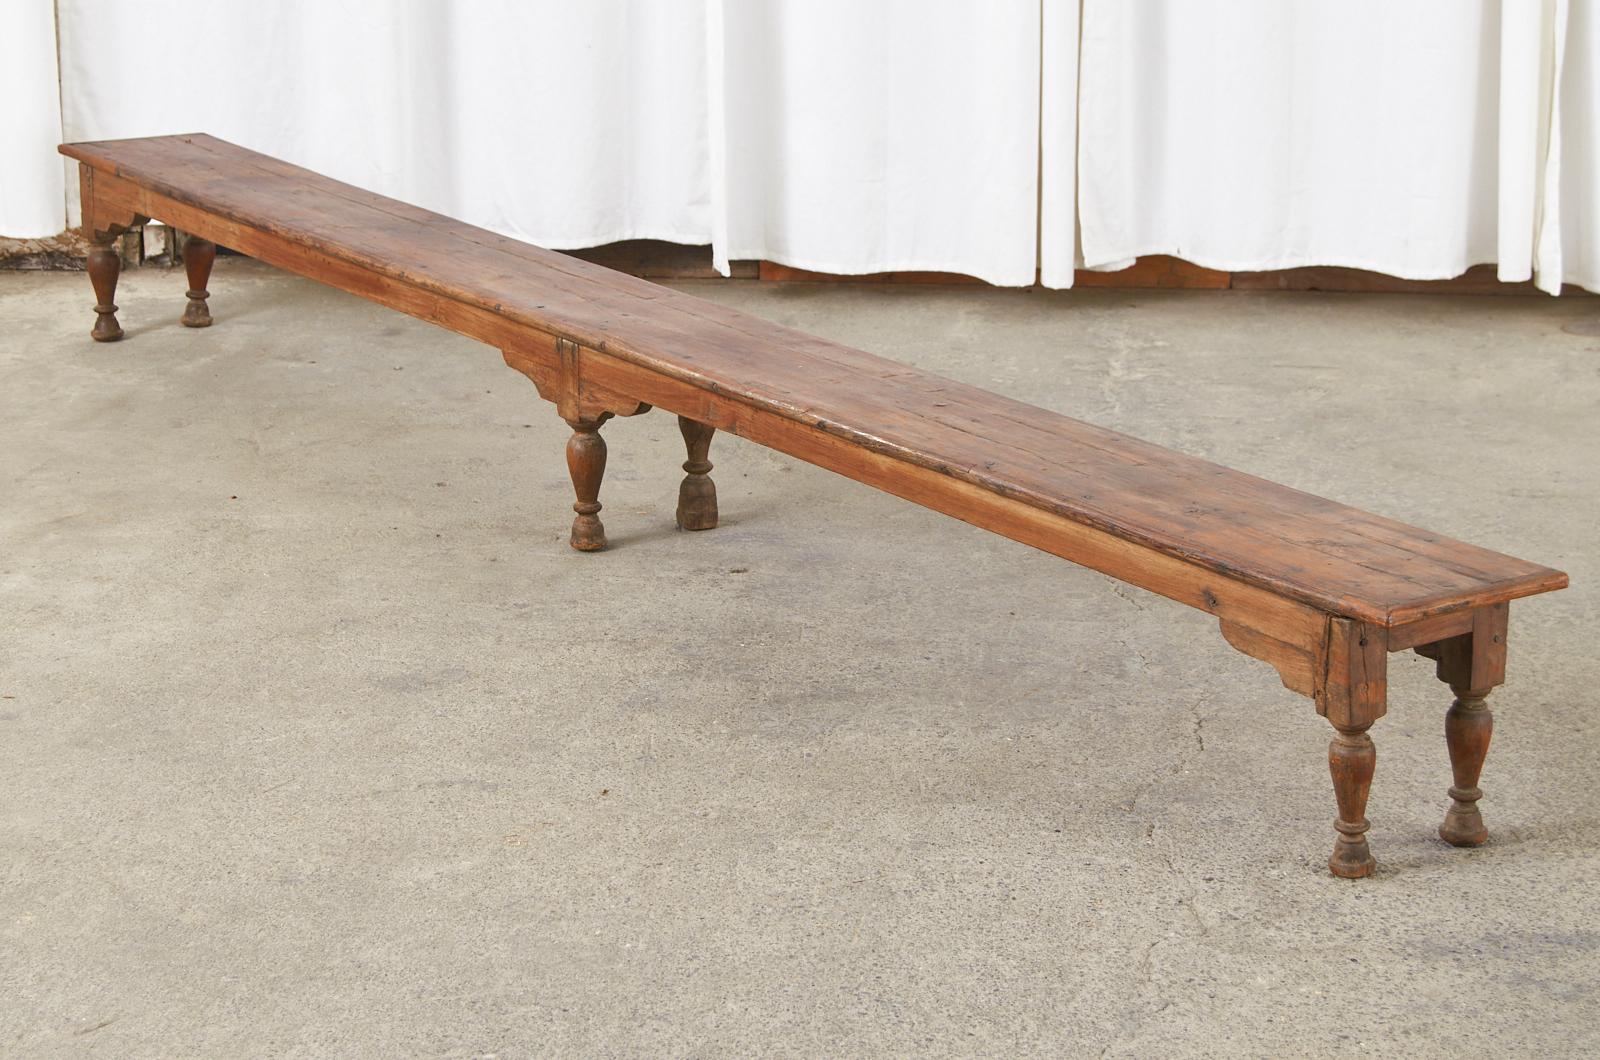 19th Century British Colonial Hardwood Low Table or Bench In Distressed Condition In Rio Vista, CA